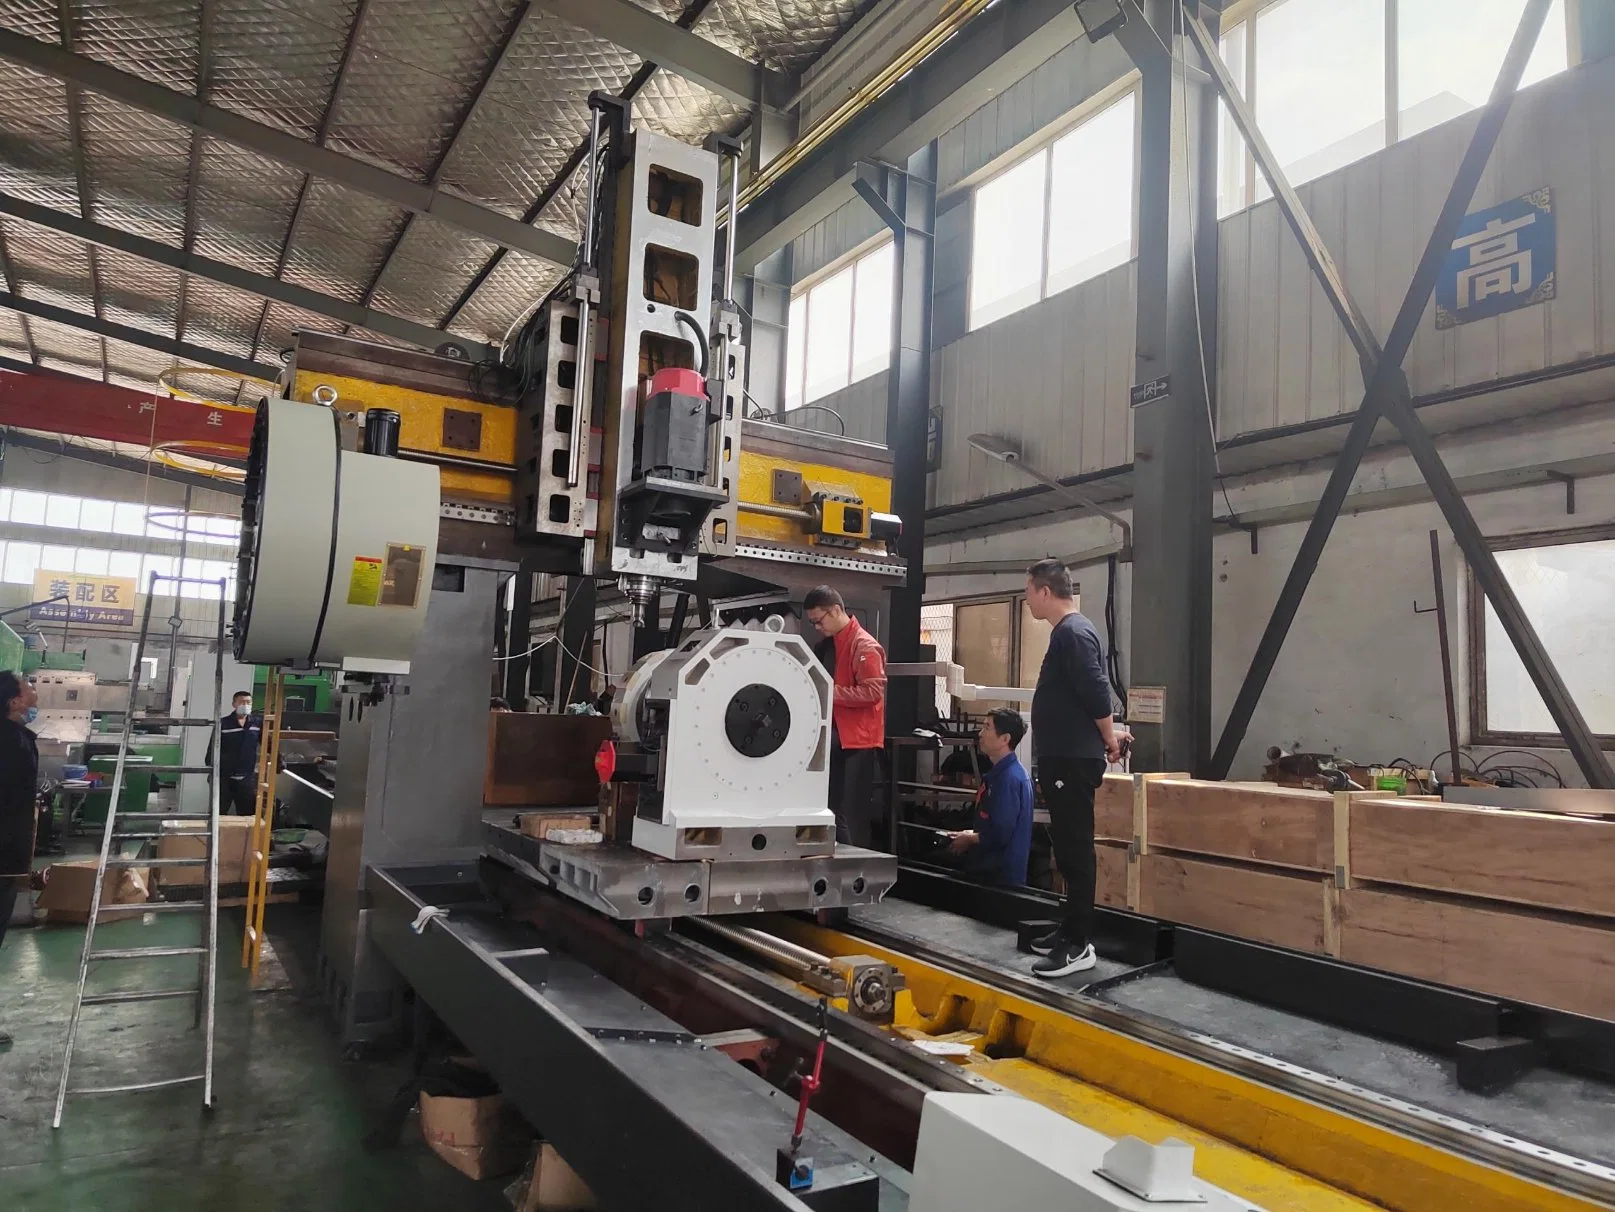 China Professional Gantry CNC Milling Machine with Boring Functions (CKM2516)